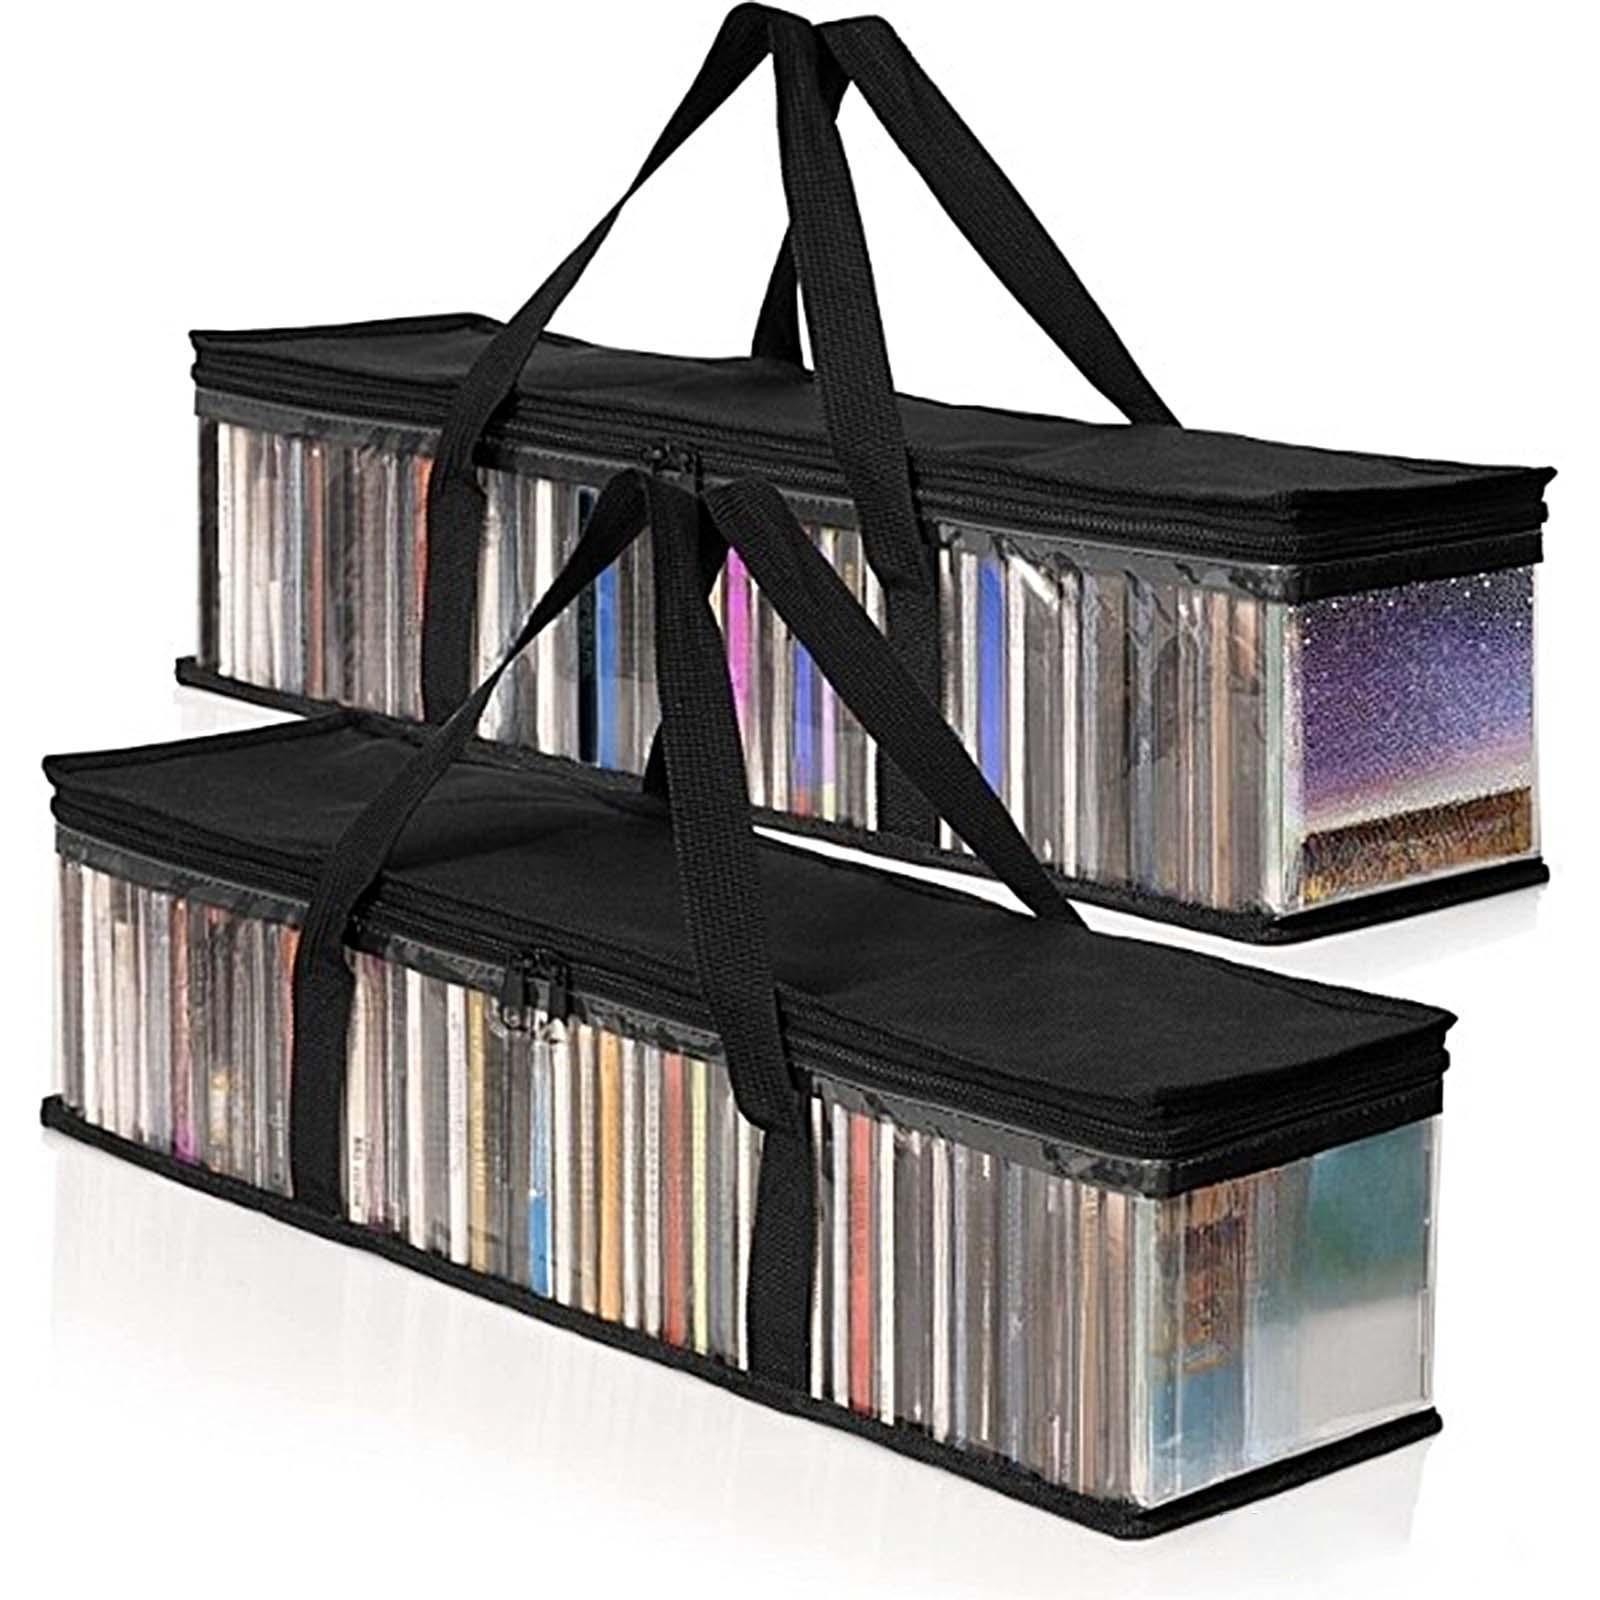 Video Games Media Storage Can Holds 40 CD Clear Windows CD Holder Case